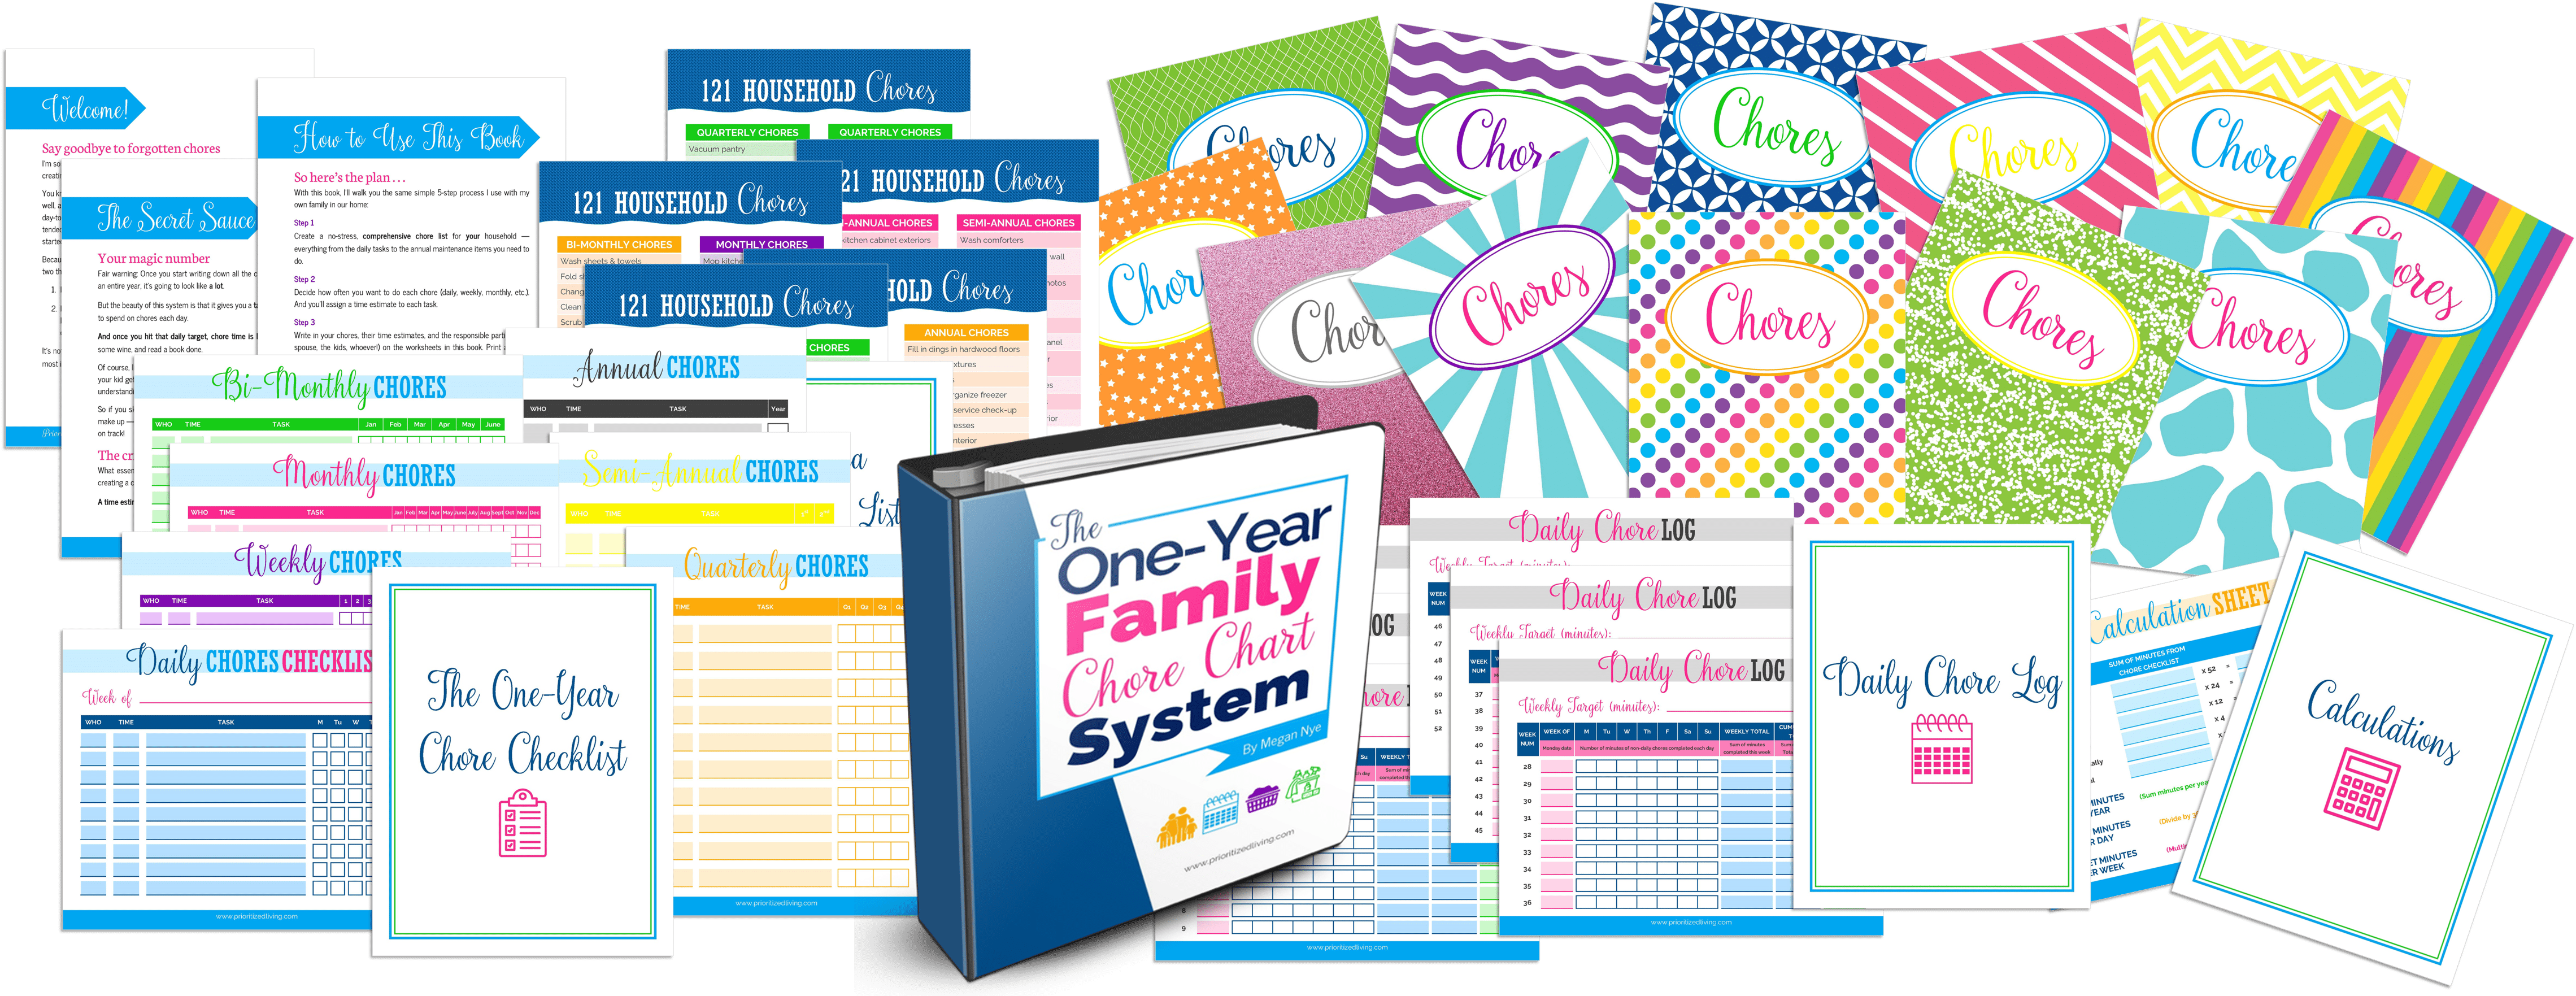 The One-Year Family Chore Chart System - Prioritized Living